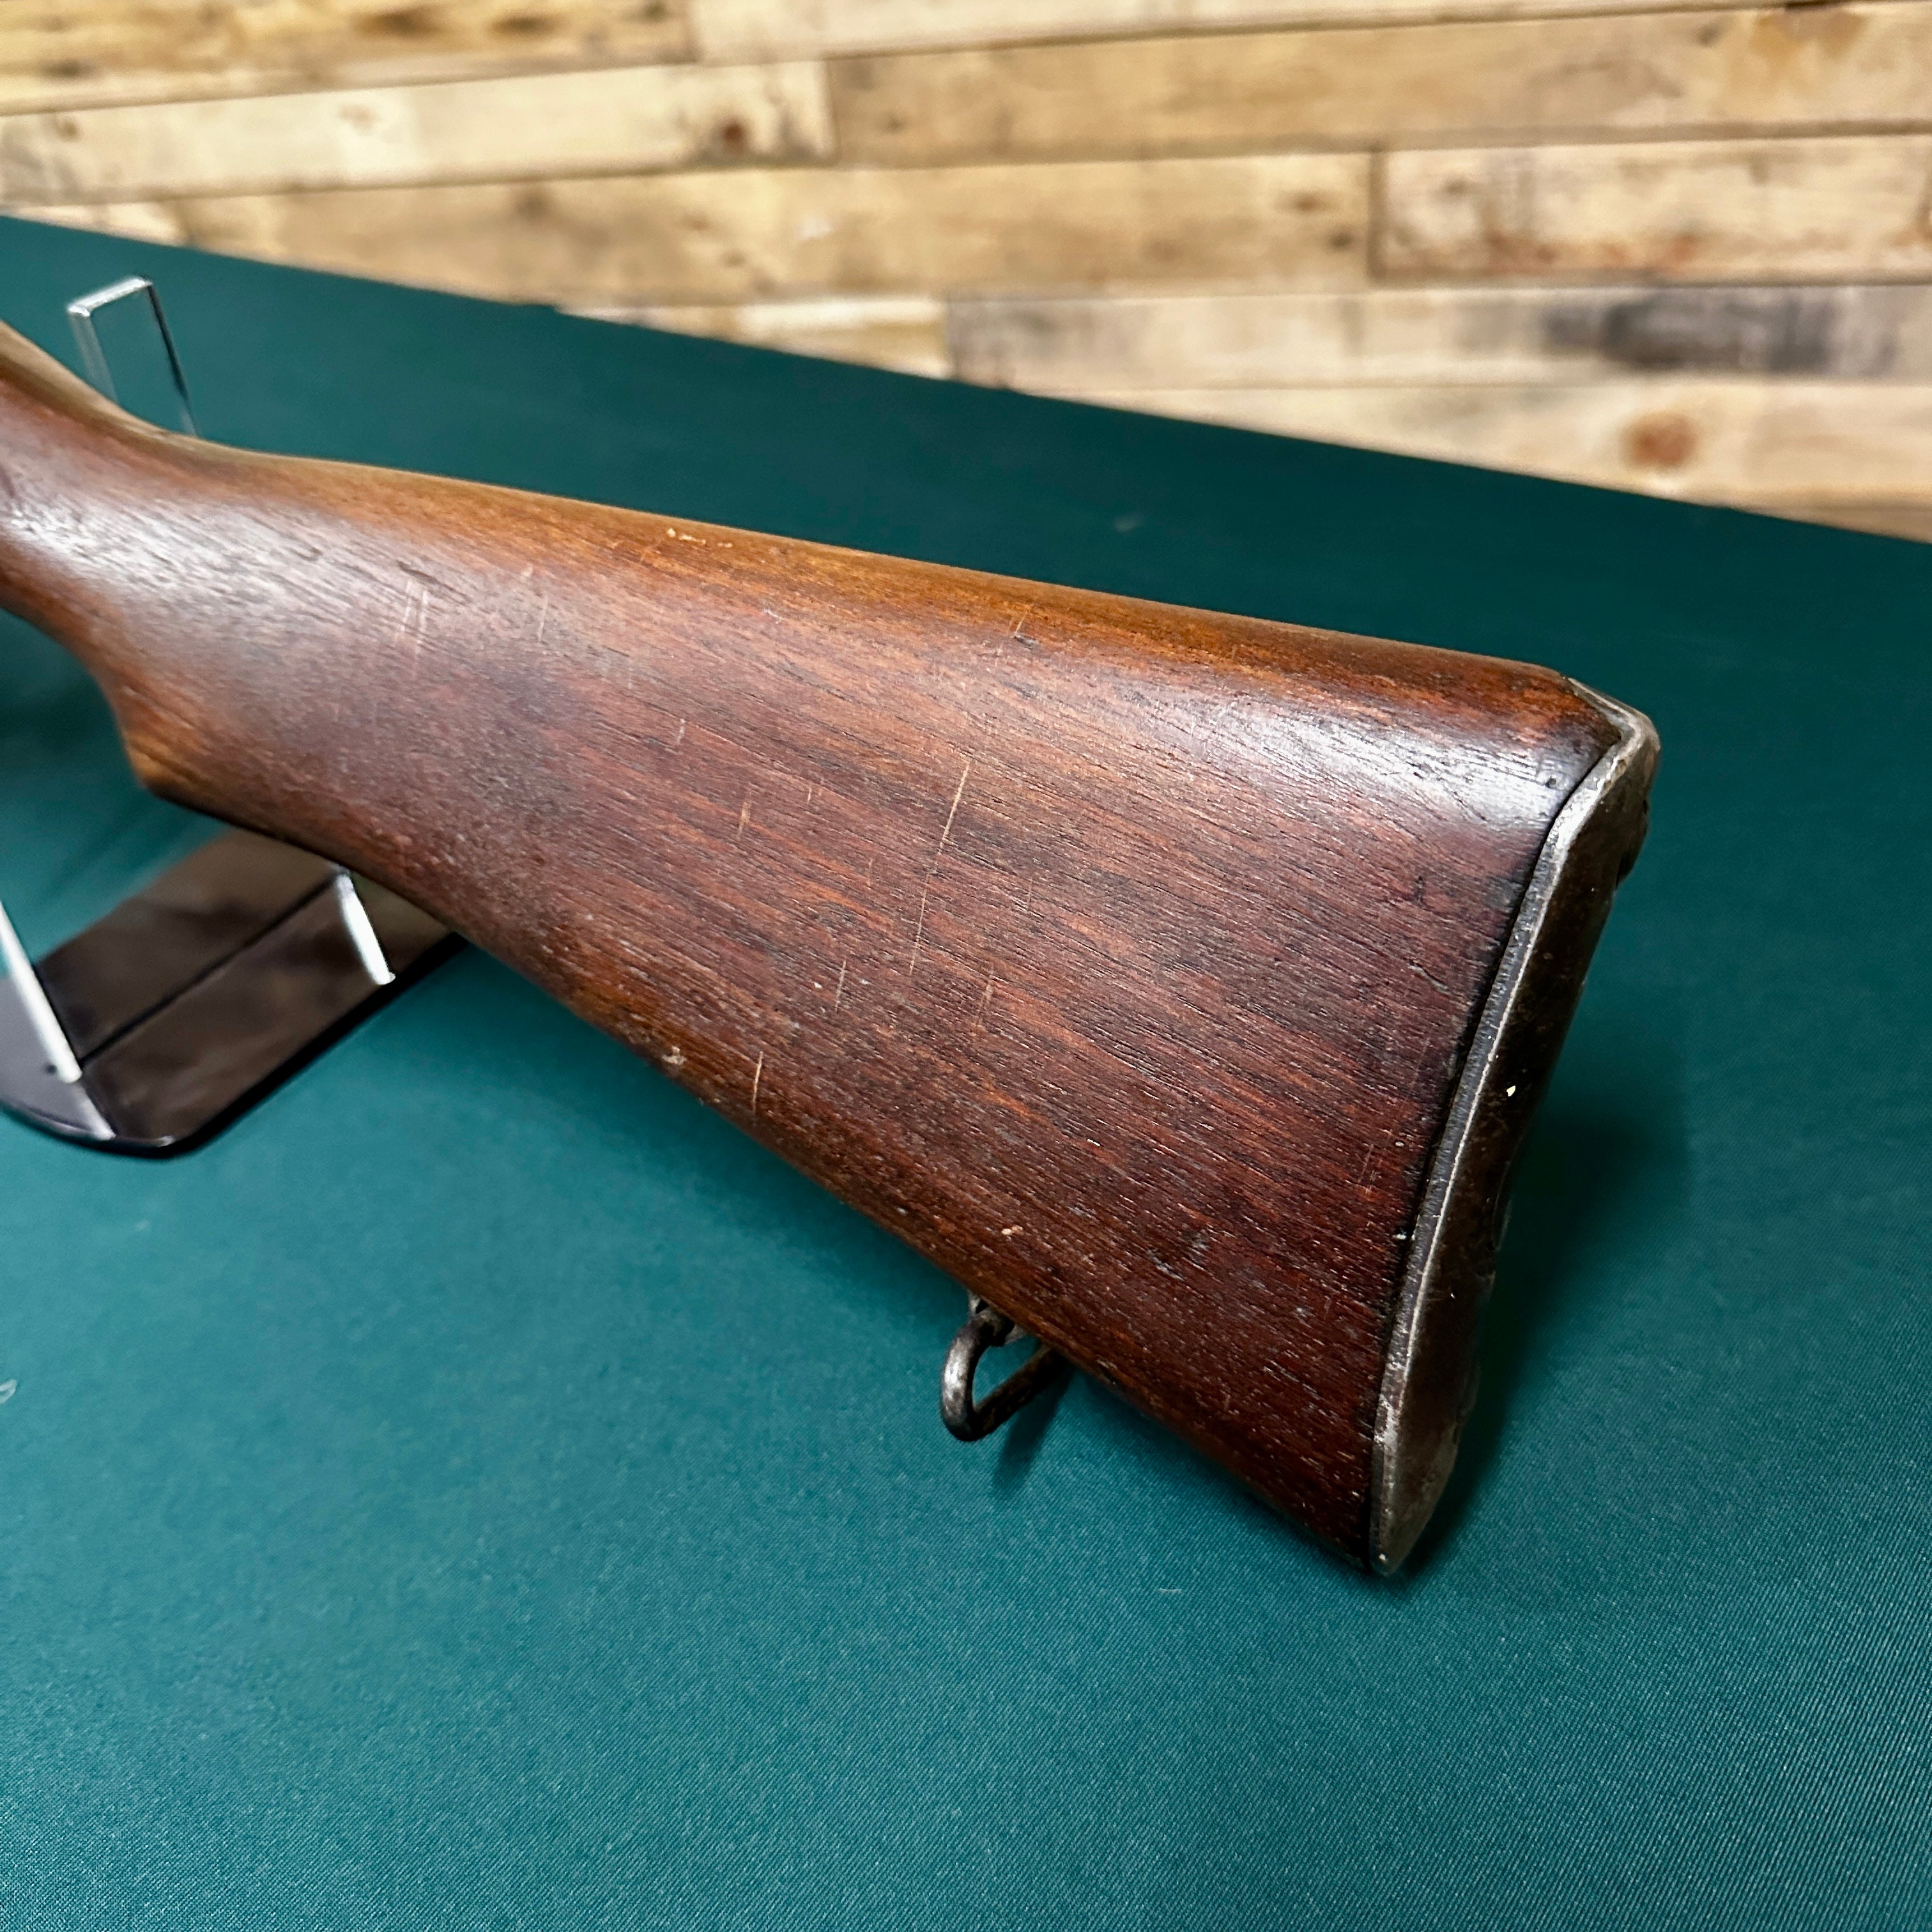 Longbranch .303 No.4 Mk1* Rifle - Contact to Purchase